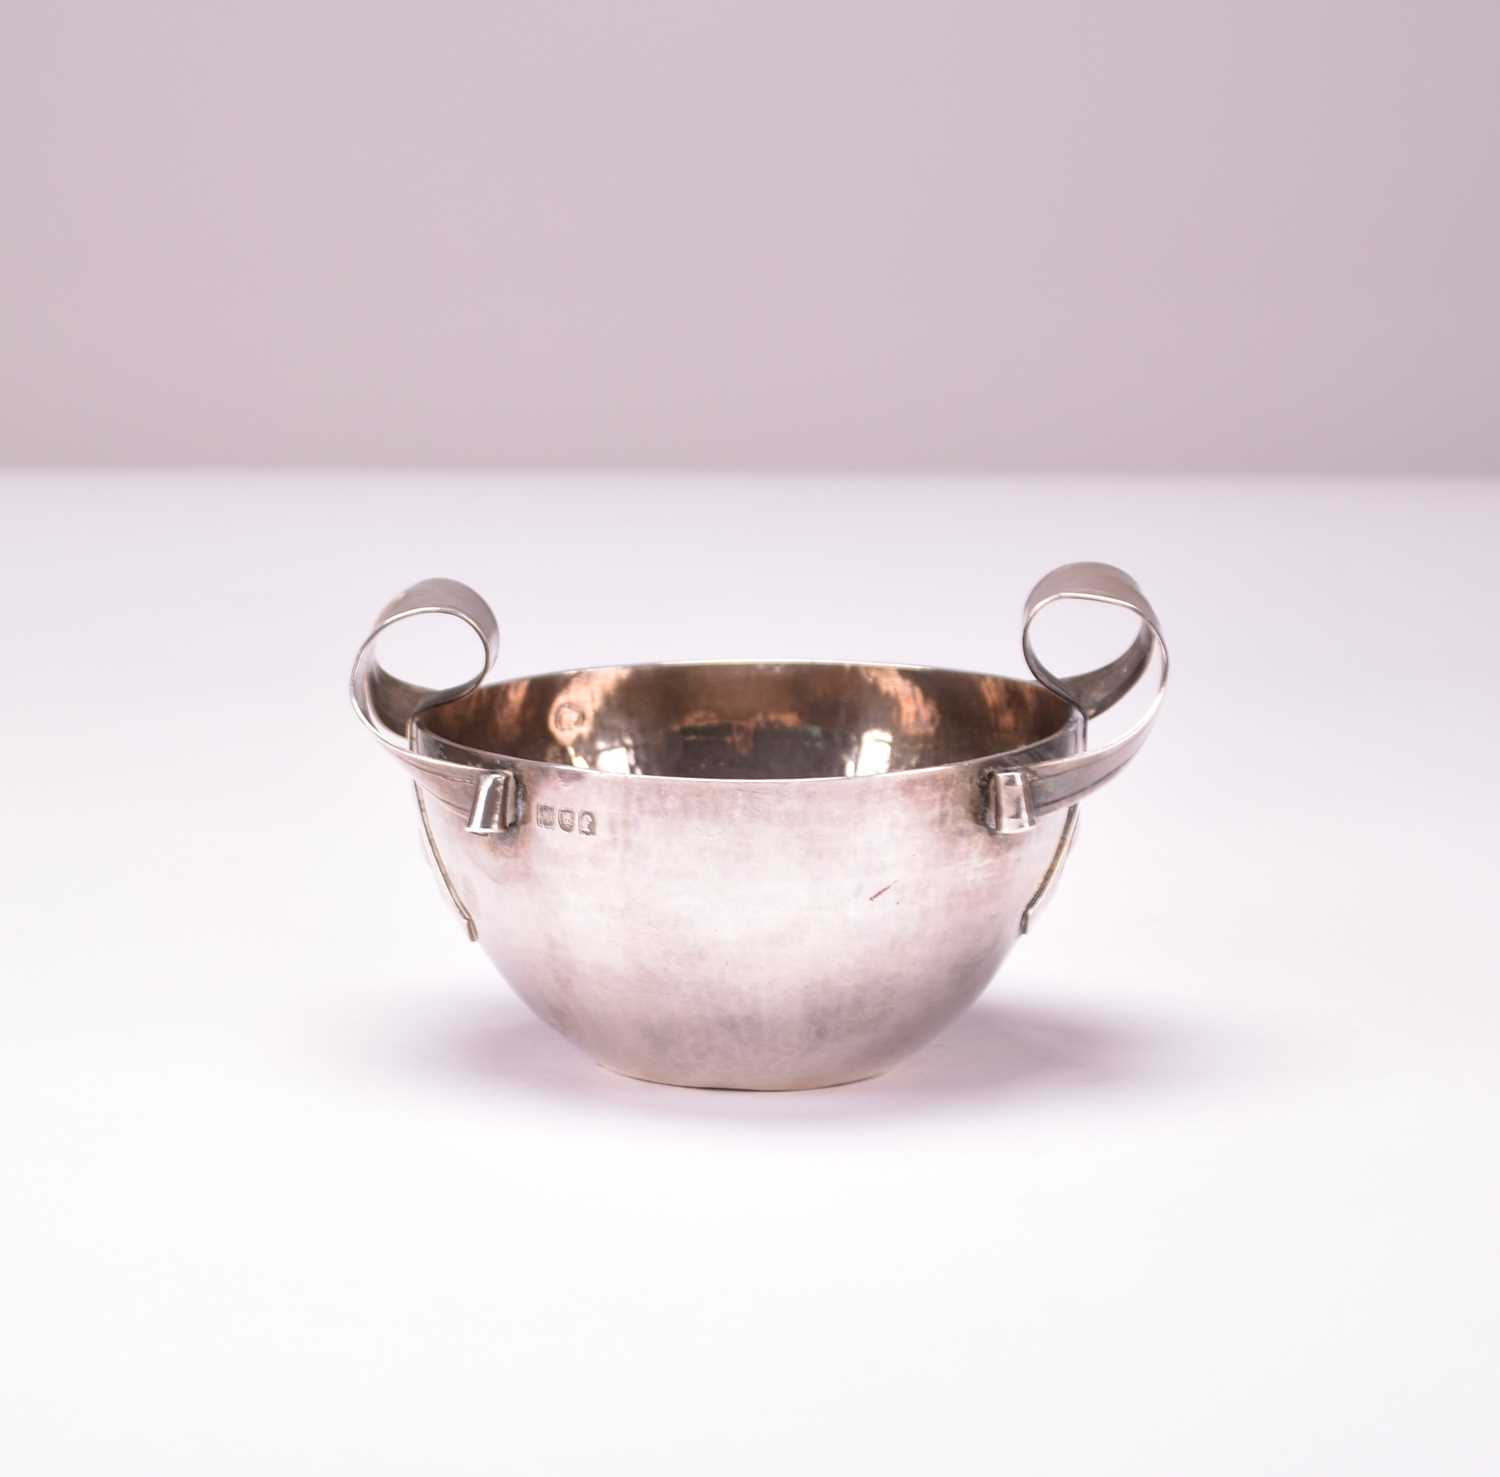 Lot 7 - An Arts and Crafts silver bowl by W G Connell